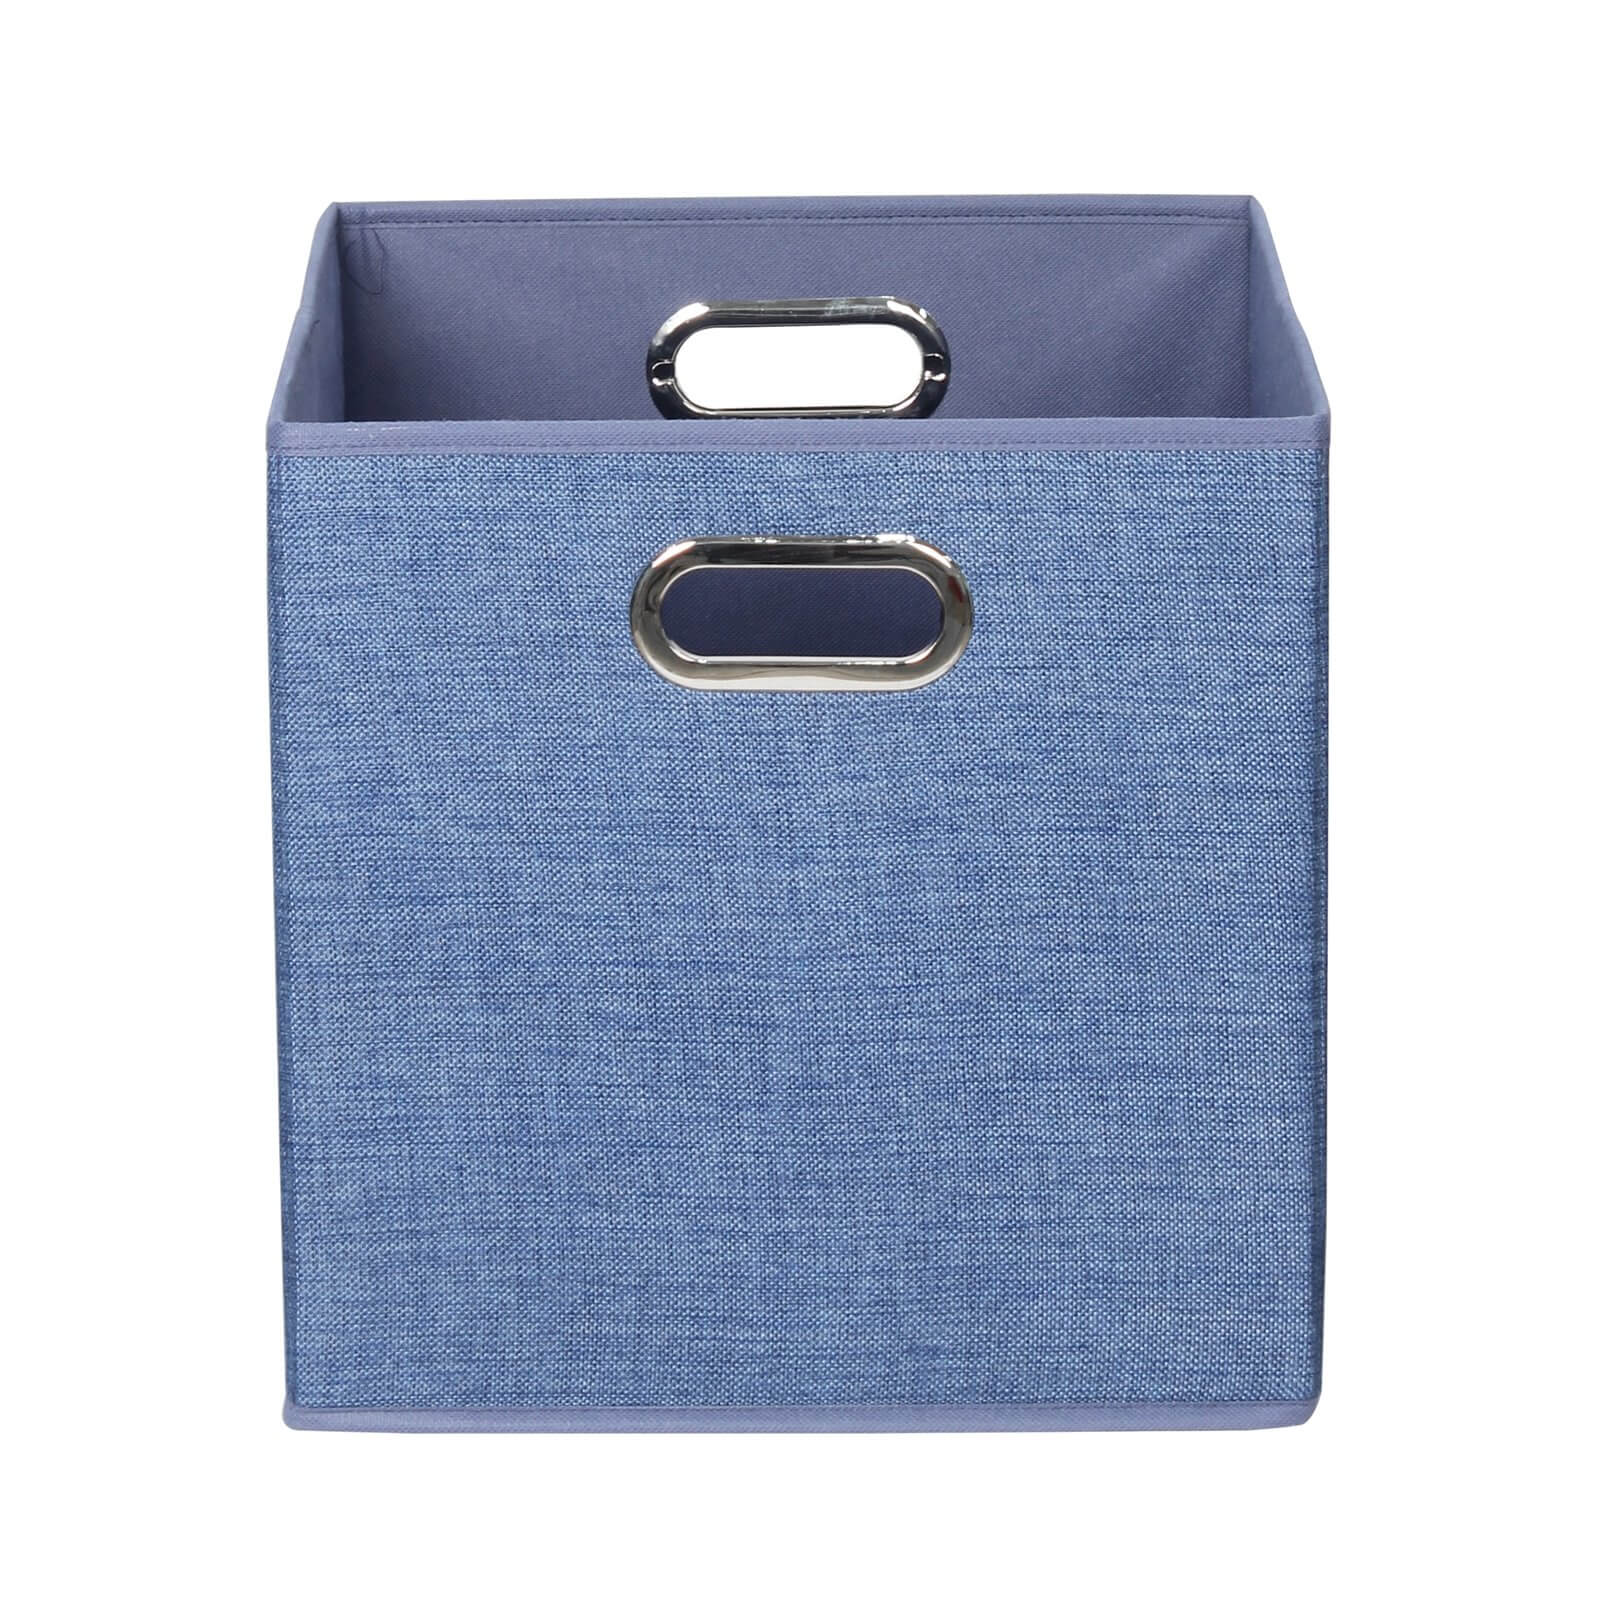 Clever Cube Fabric Insert - Steel Blue